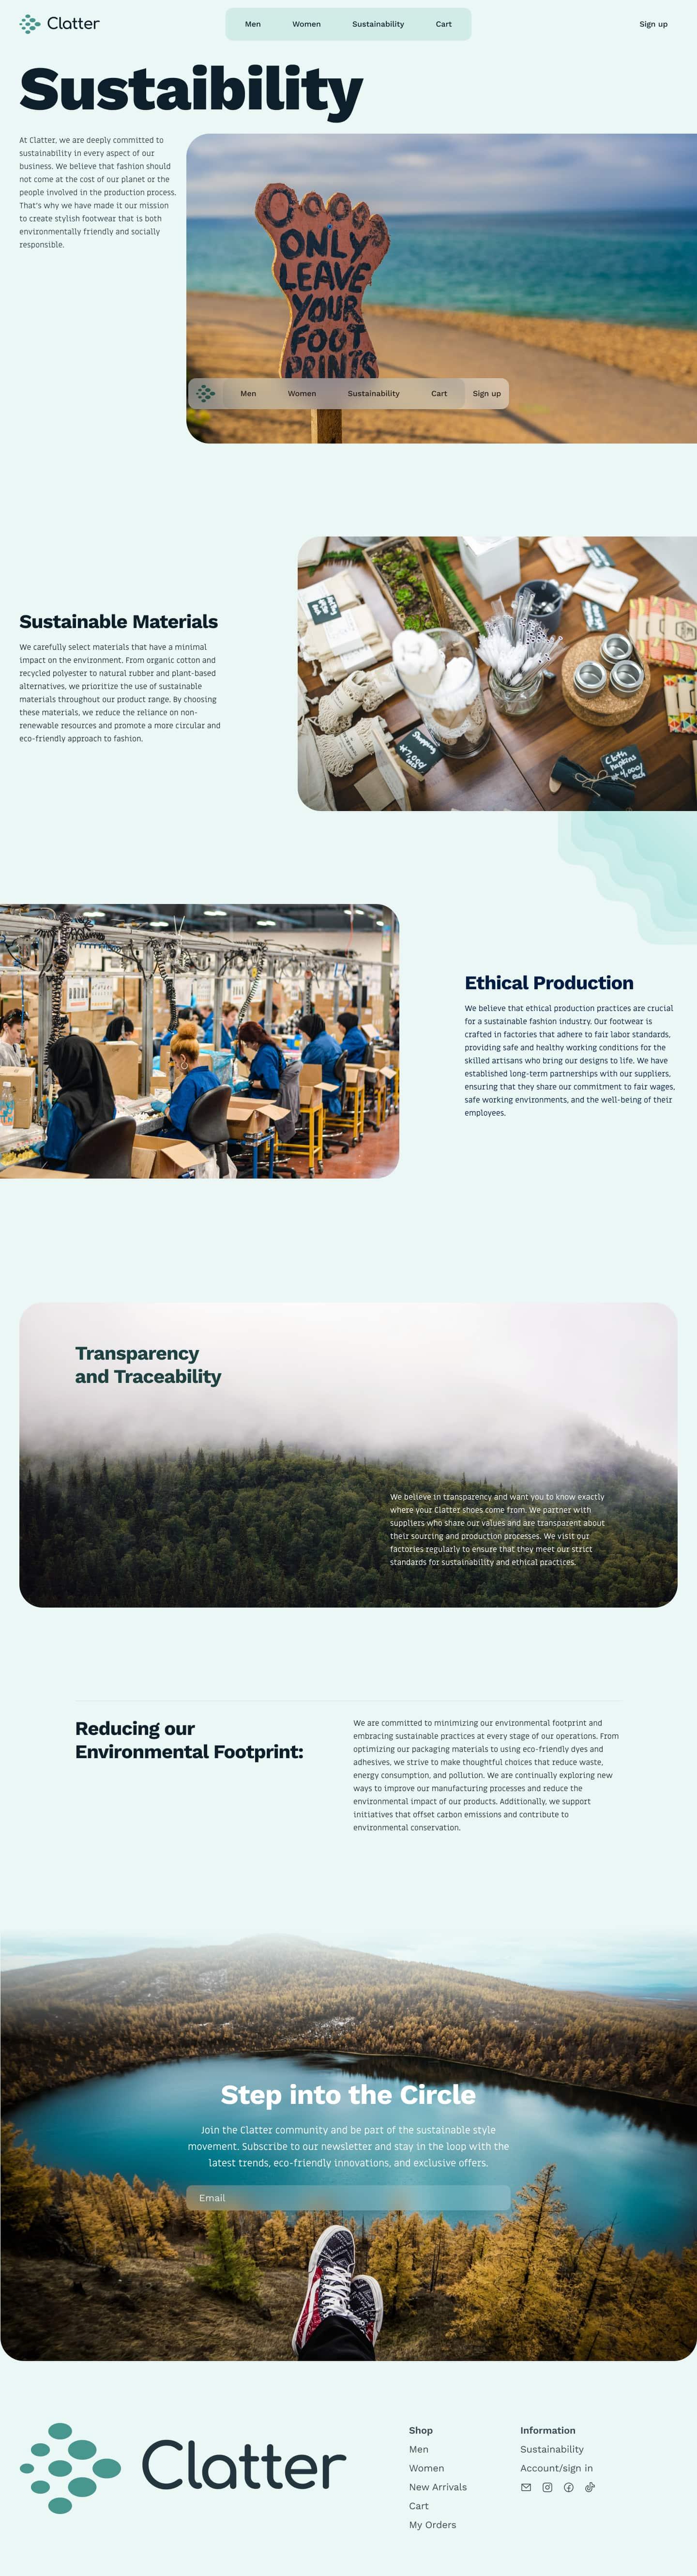 clatter-sustainability-page.jpg